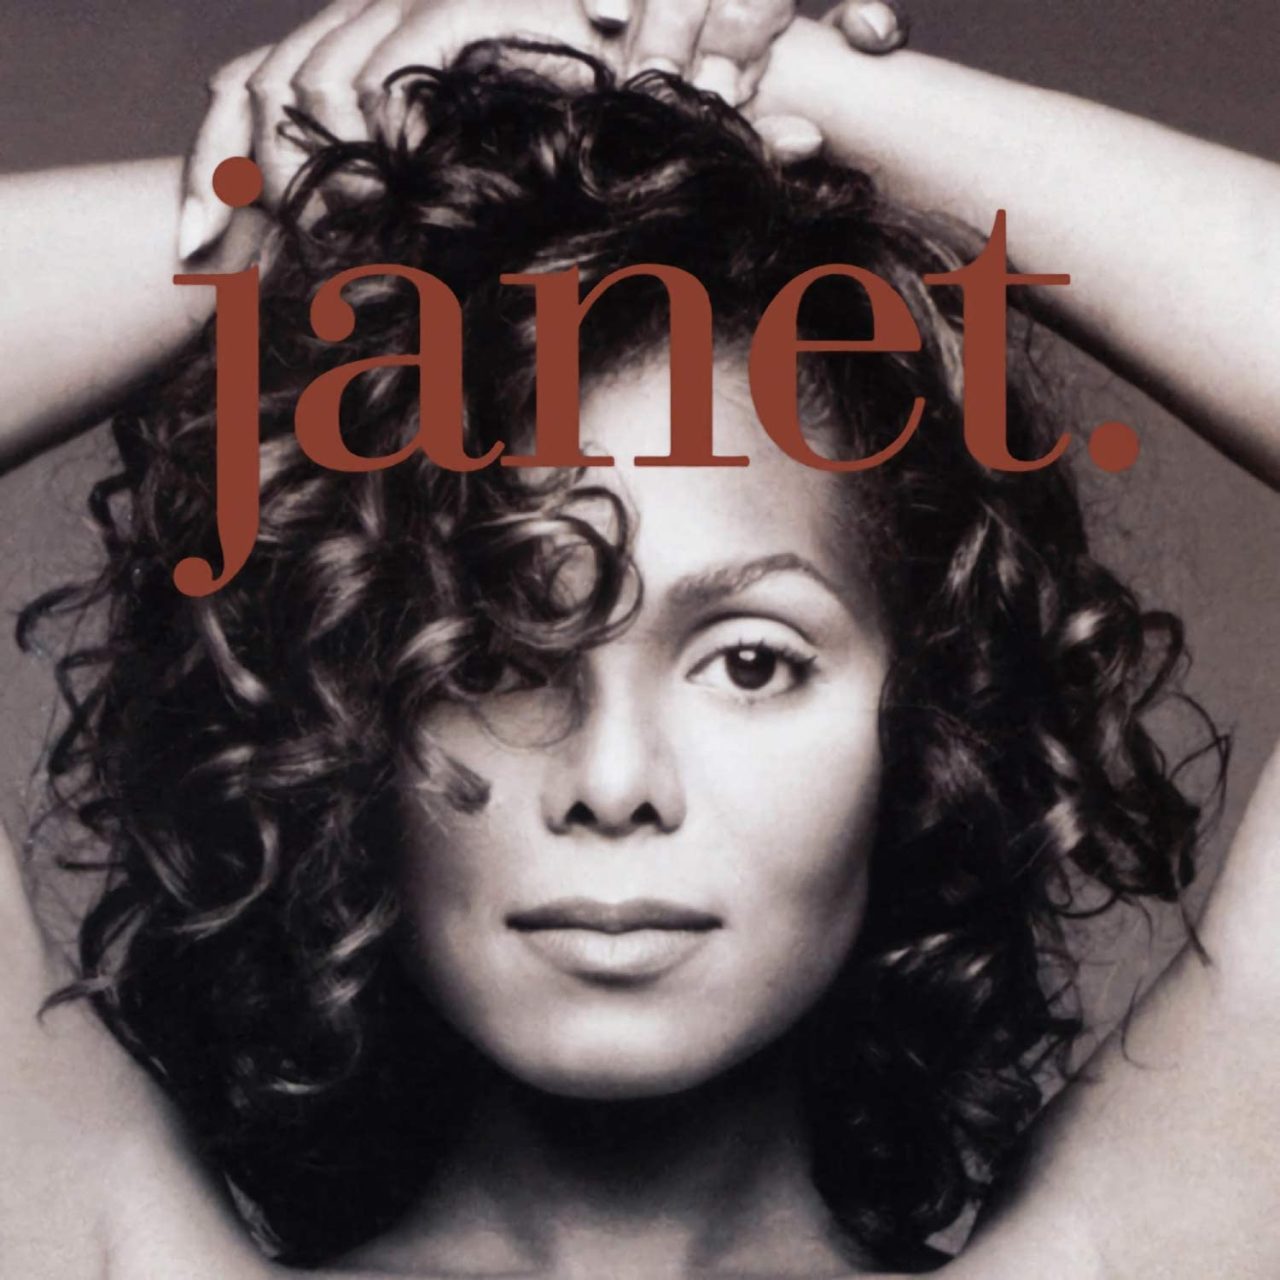 The cover art for Janet Jackson's fifth album, <i>Janet.</i>